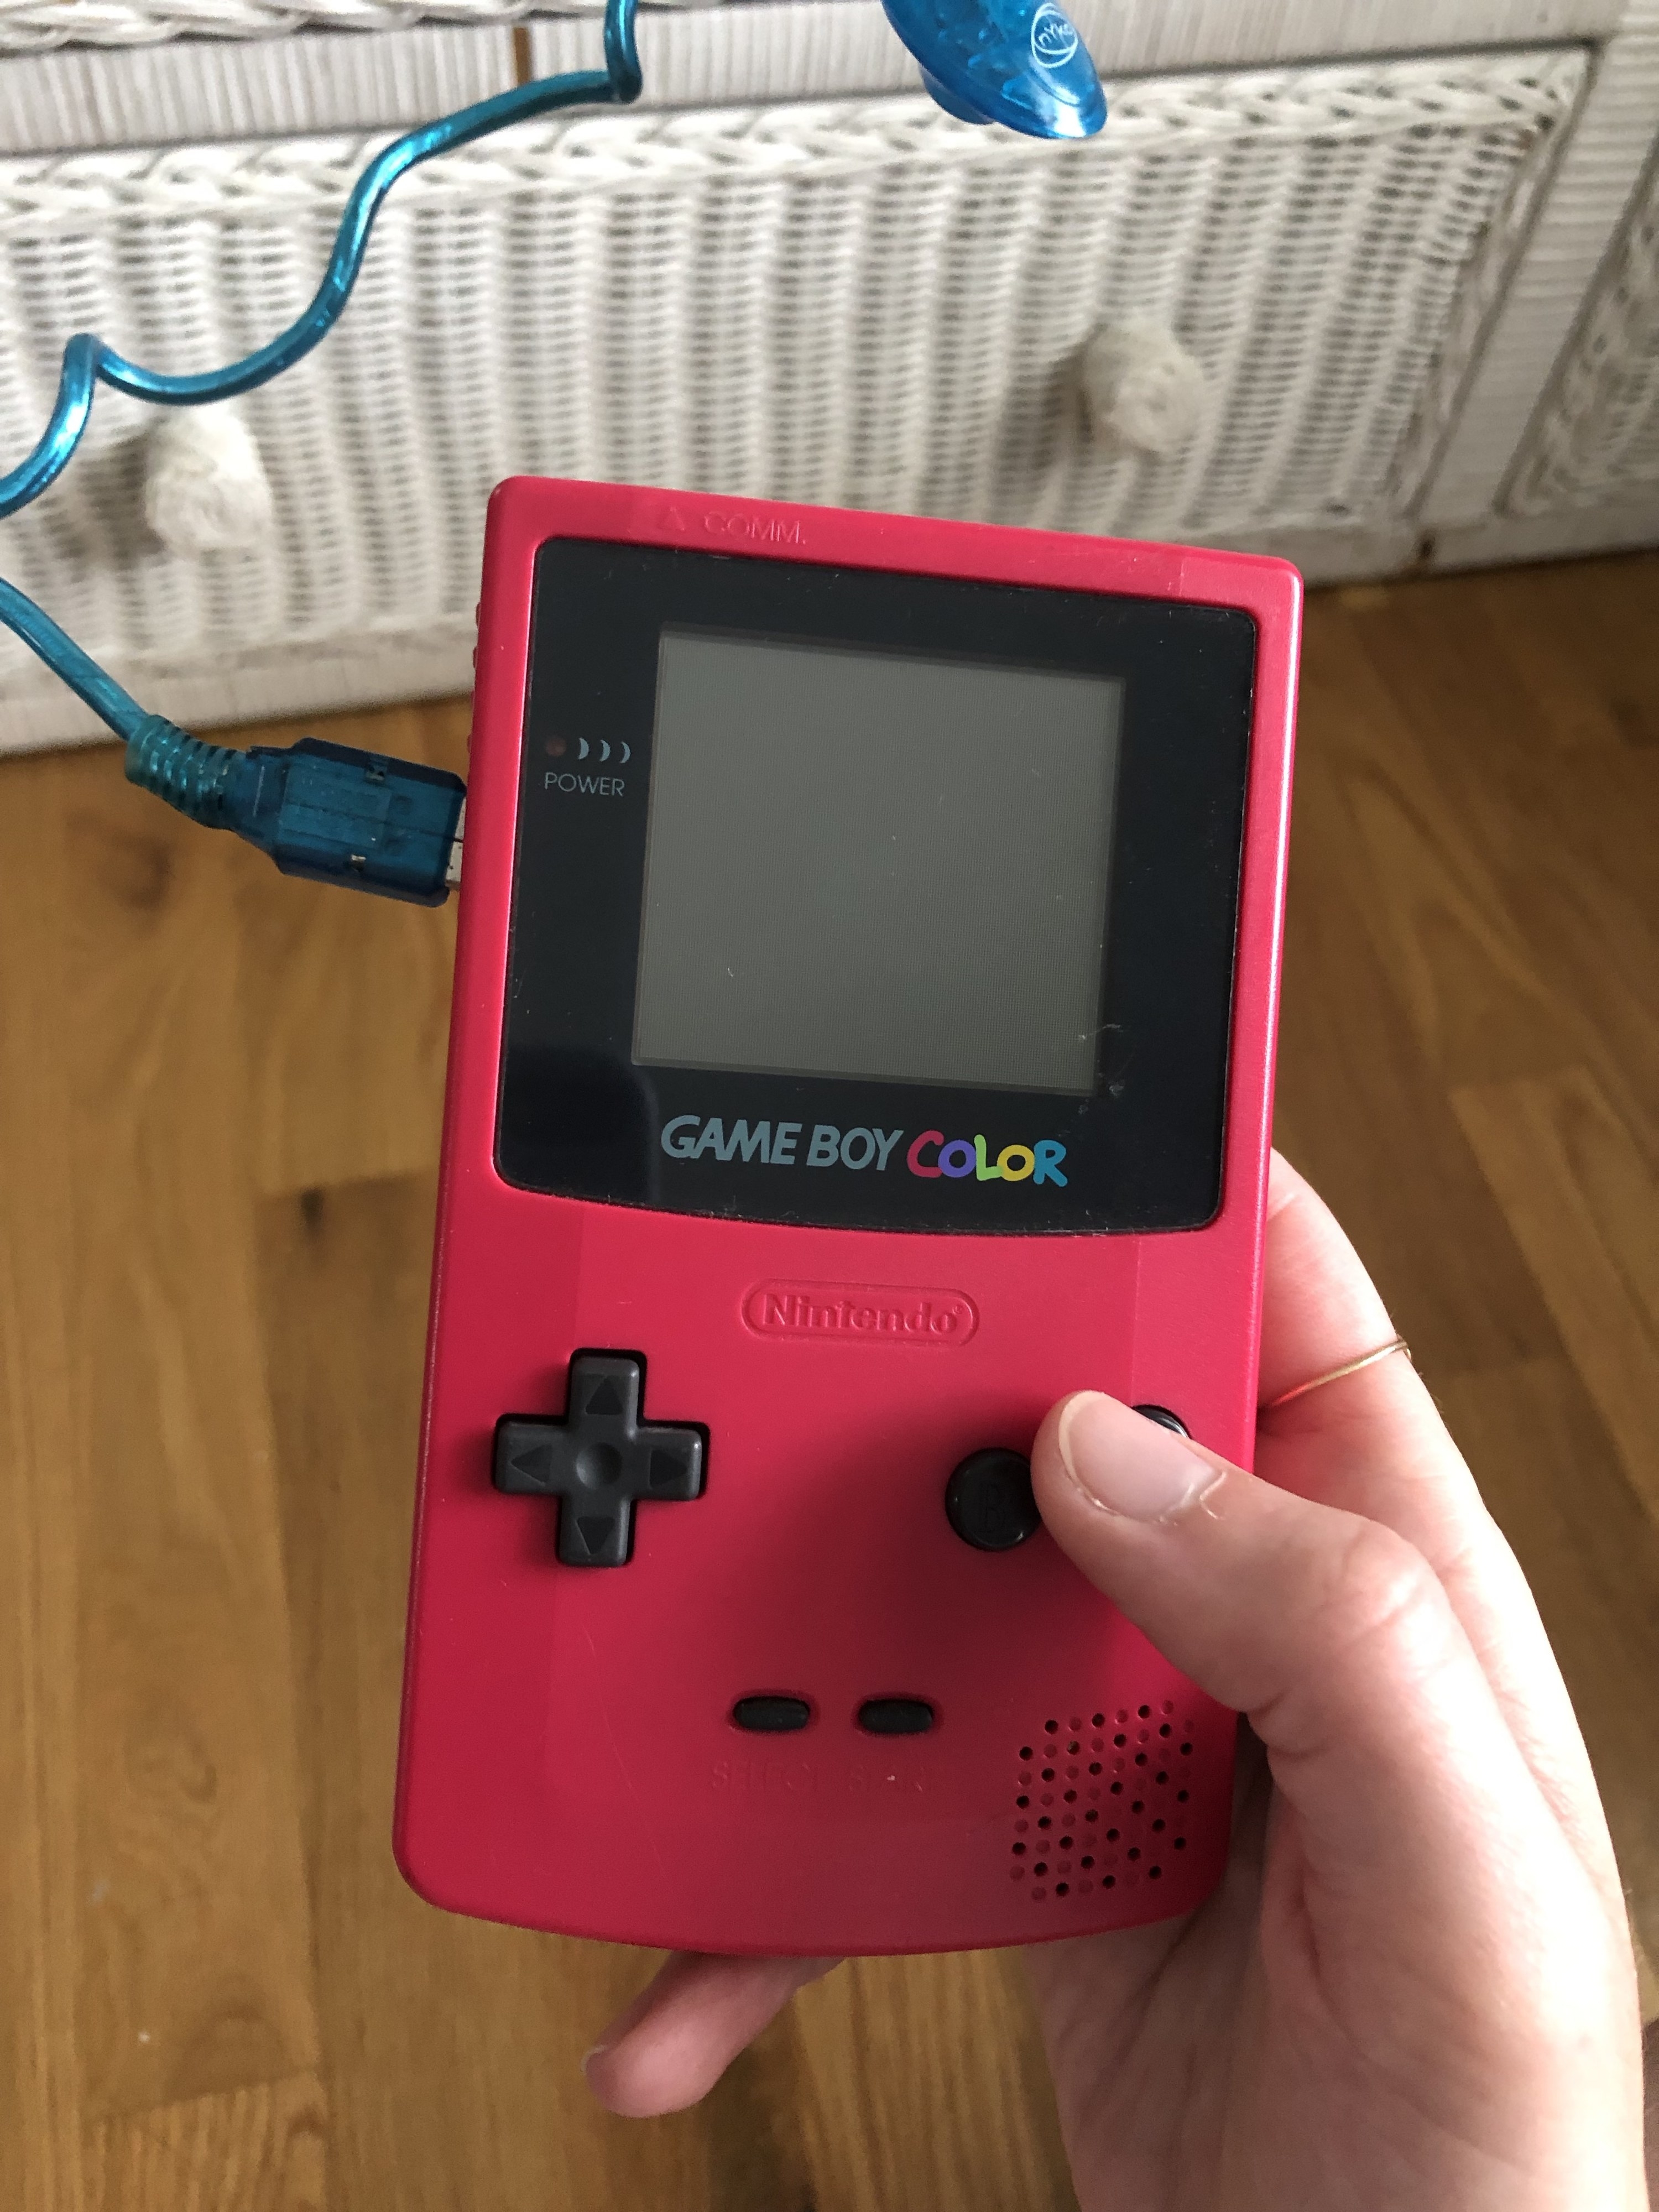 Game Boy Color also includes a twistable night-light